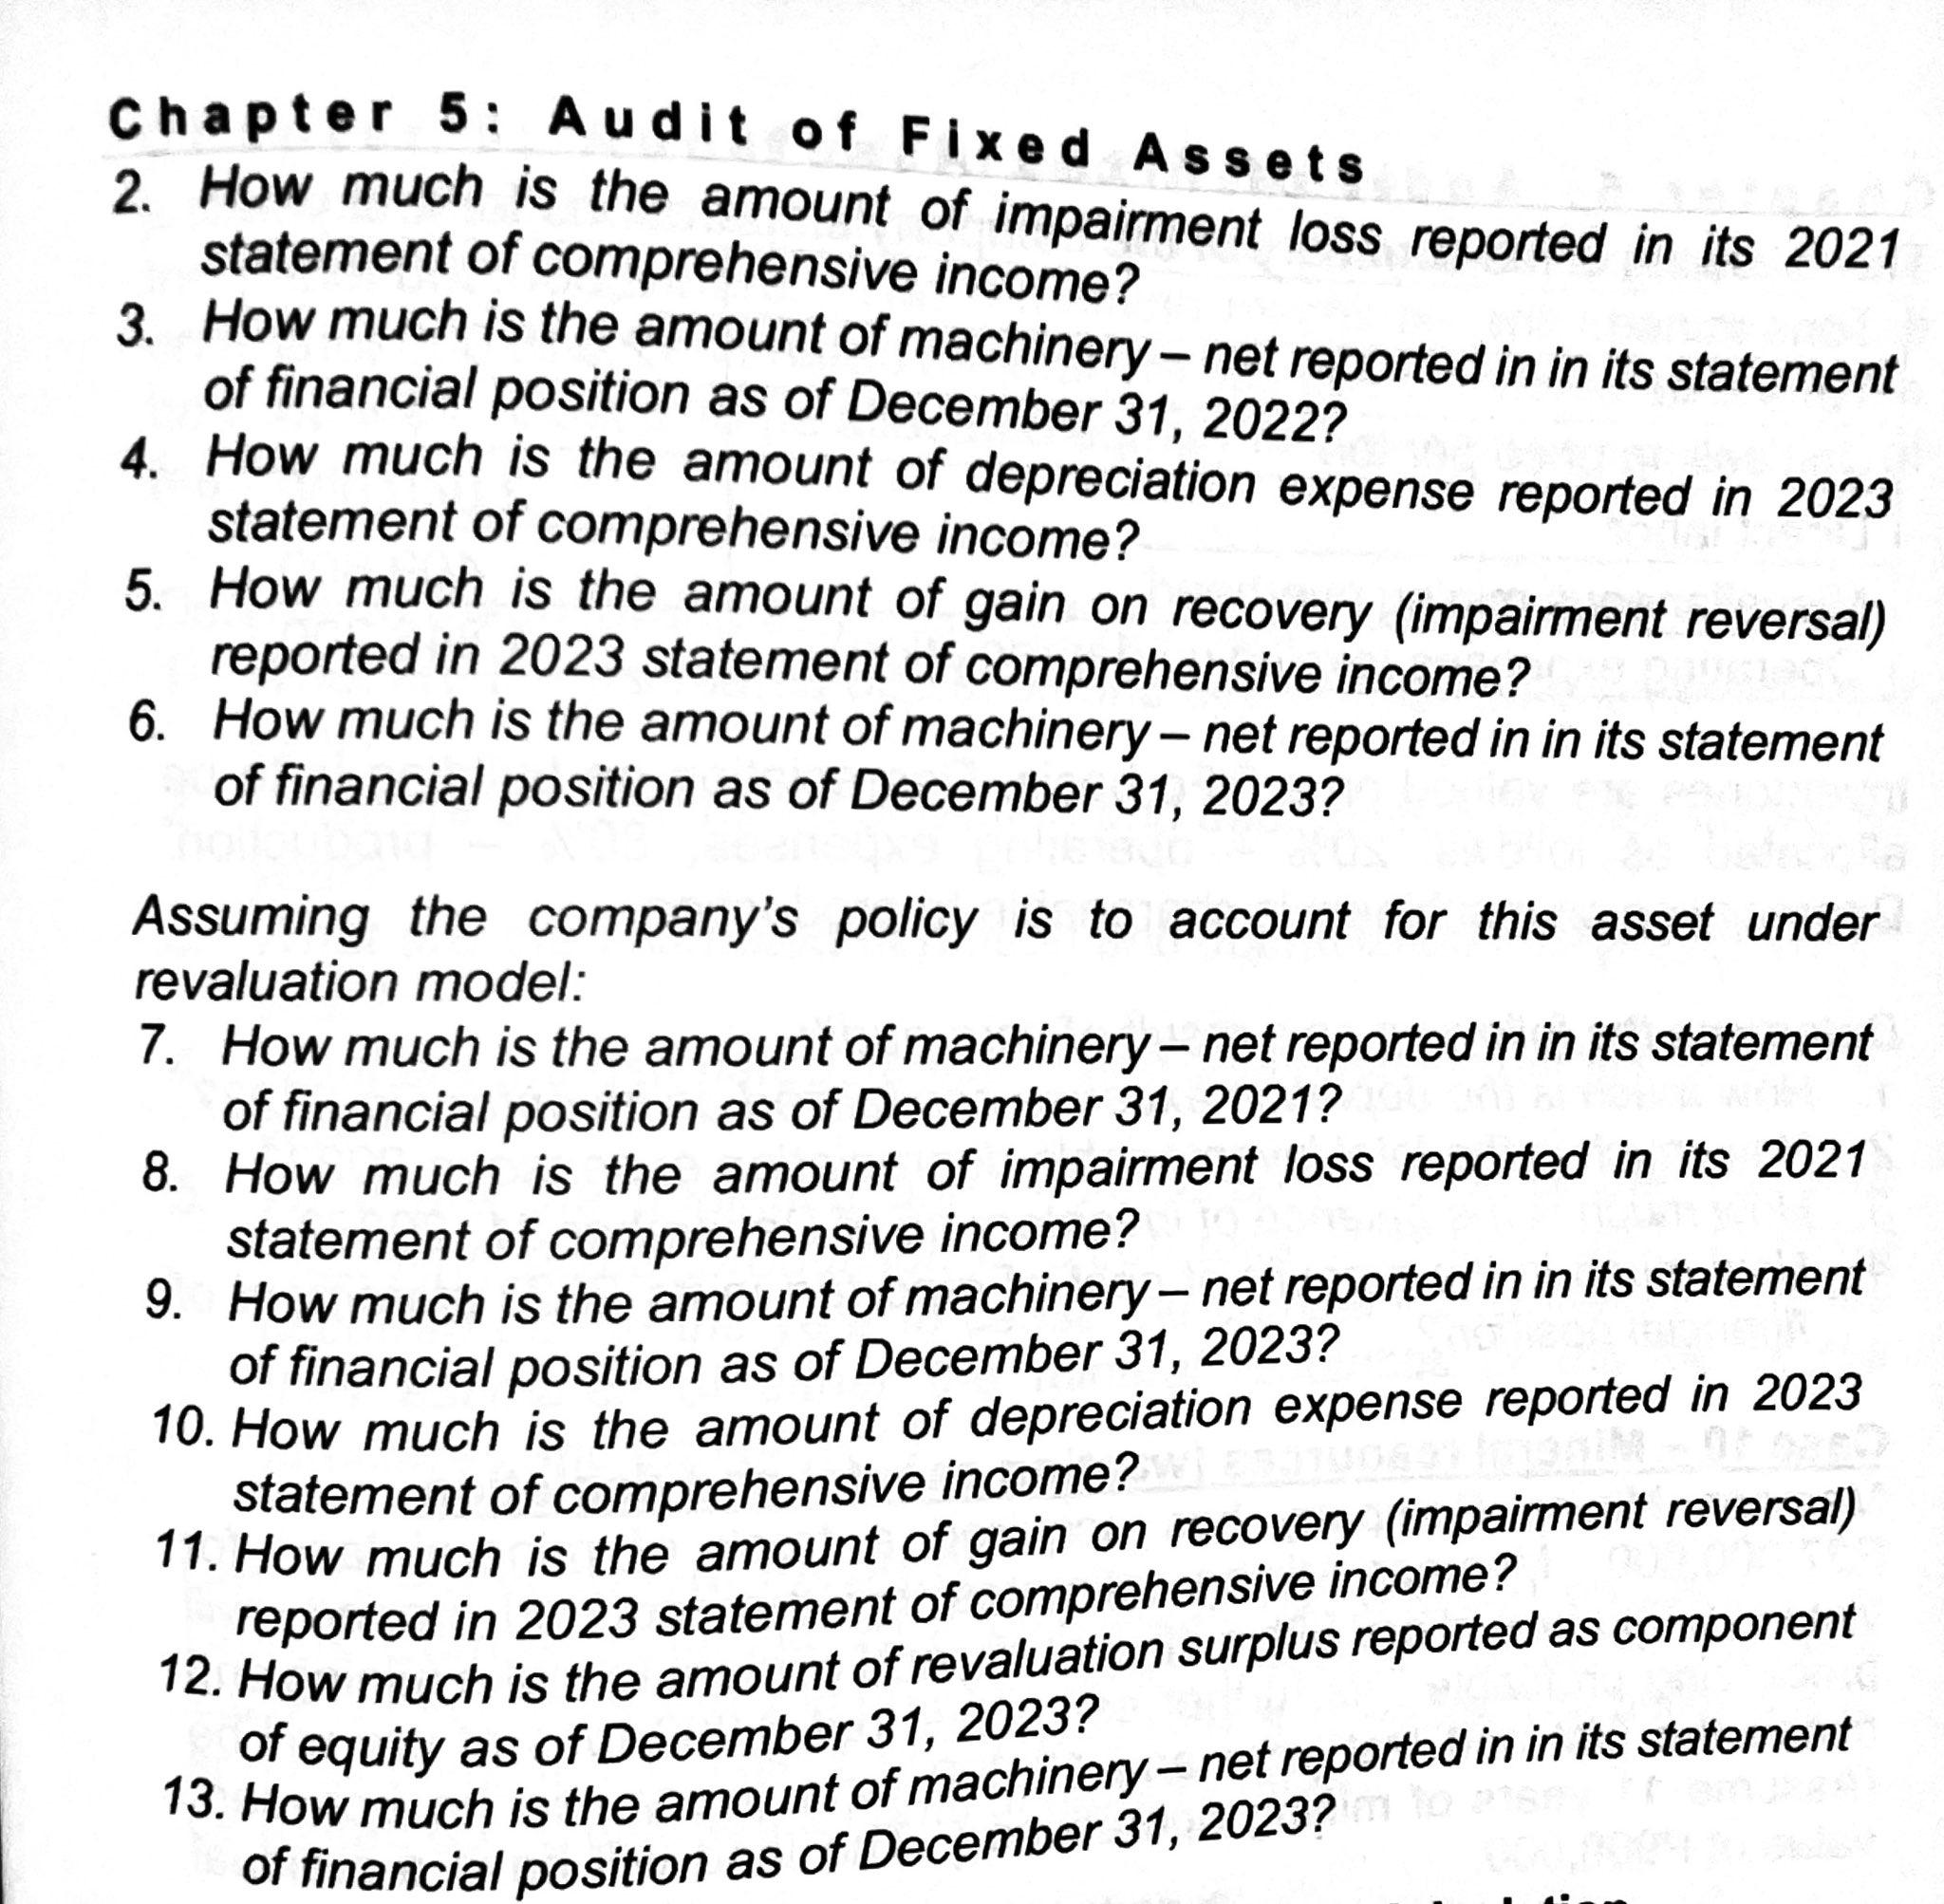 Chapter 5: Audit of Fixed Assets 2. How much is the amount of impairment loss reported in its 2021 statement